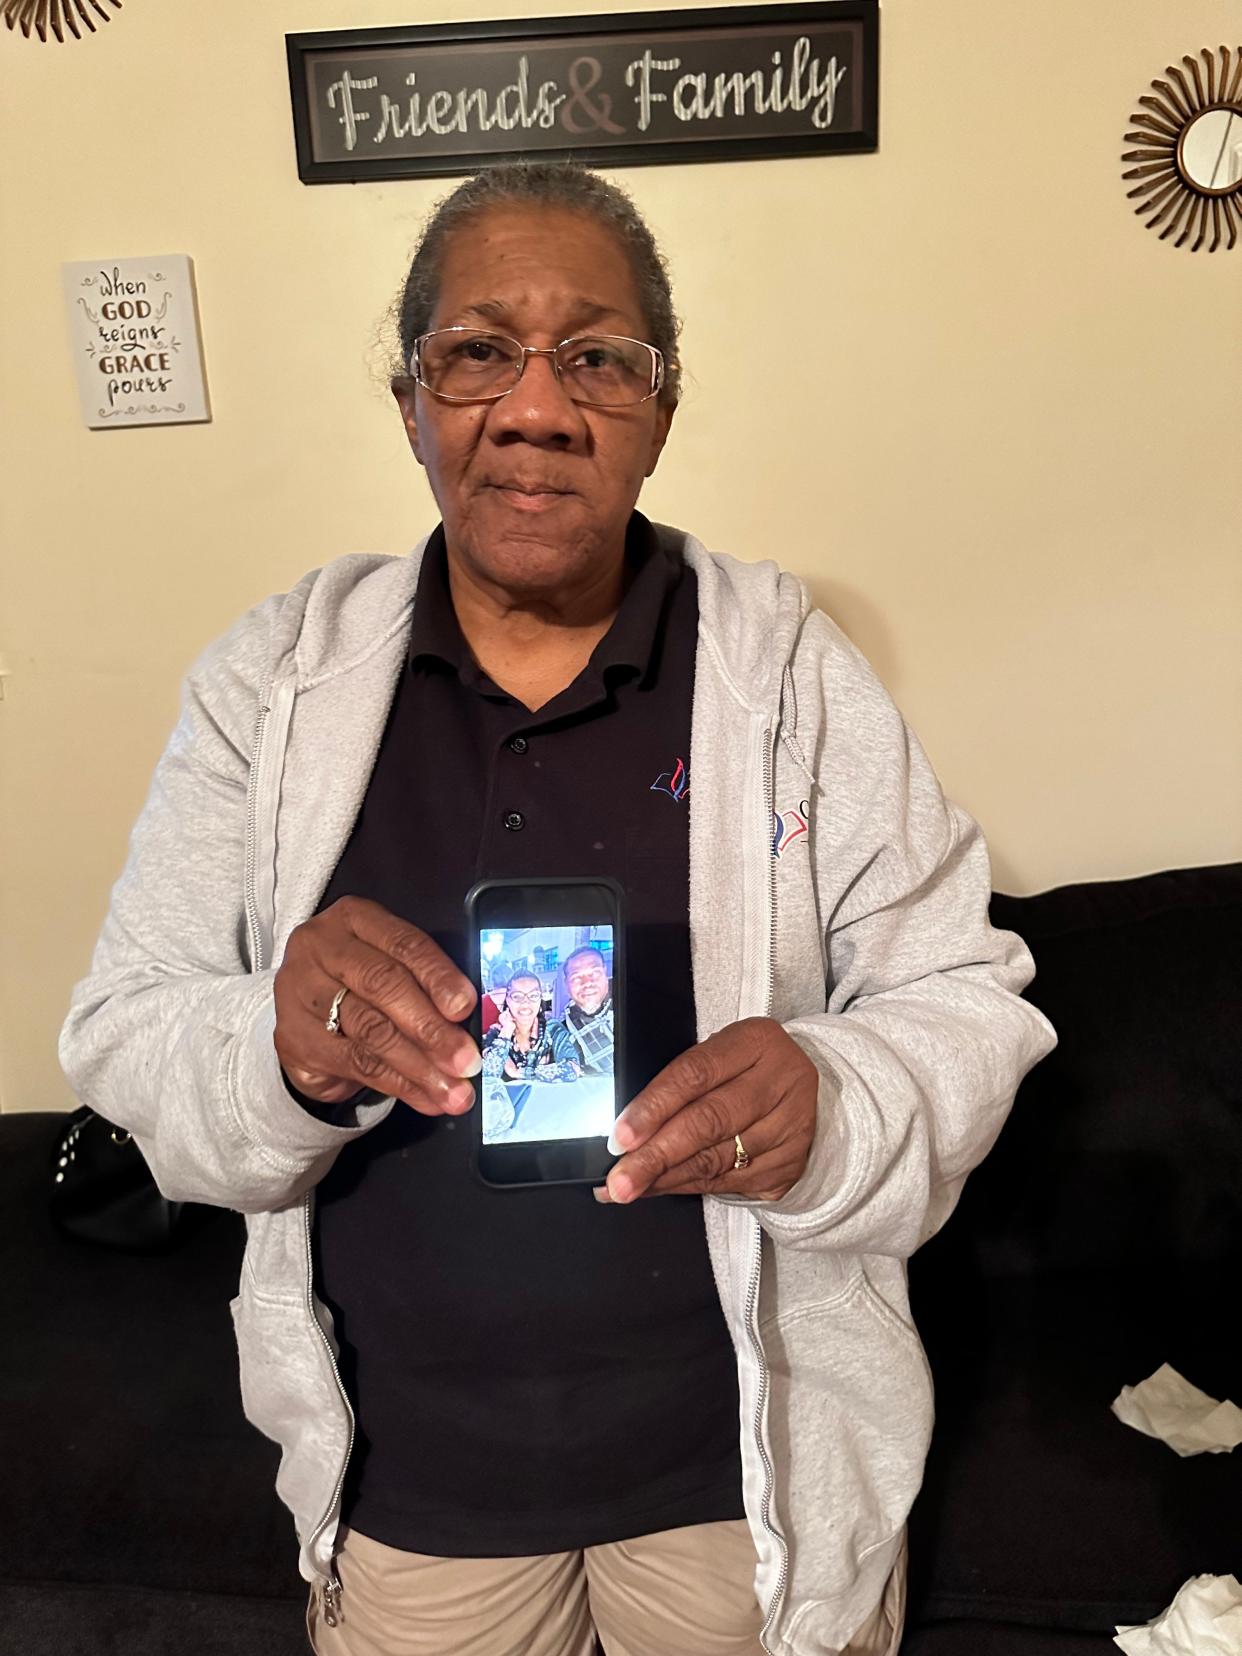 Phyllis Sims is seeking answers into the death of her son, Timothy Ruff. Ruff was shot and killed in March, and the man accused of his murder is still on the run.